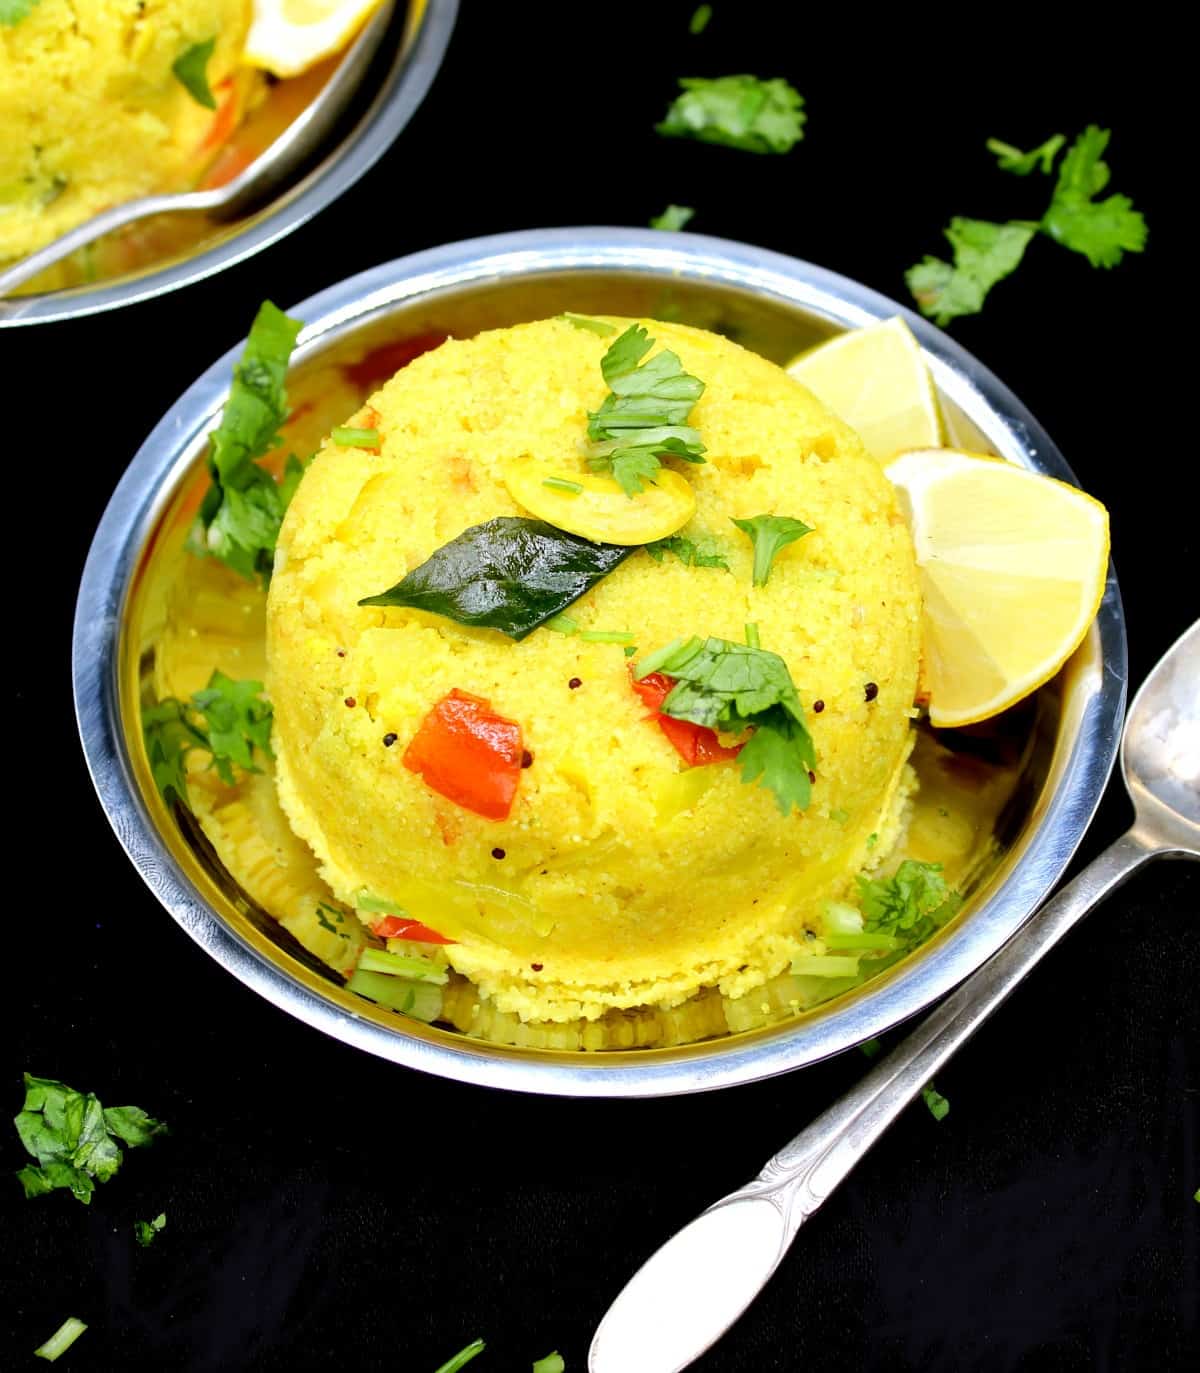 Upma with wedges of lemon, tomatoes, cilantro and curry leaves with a spoon next to it on a black background.